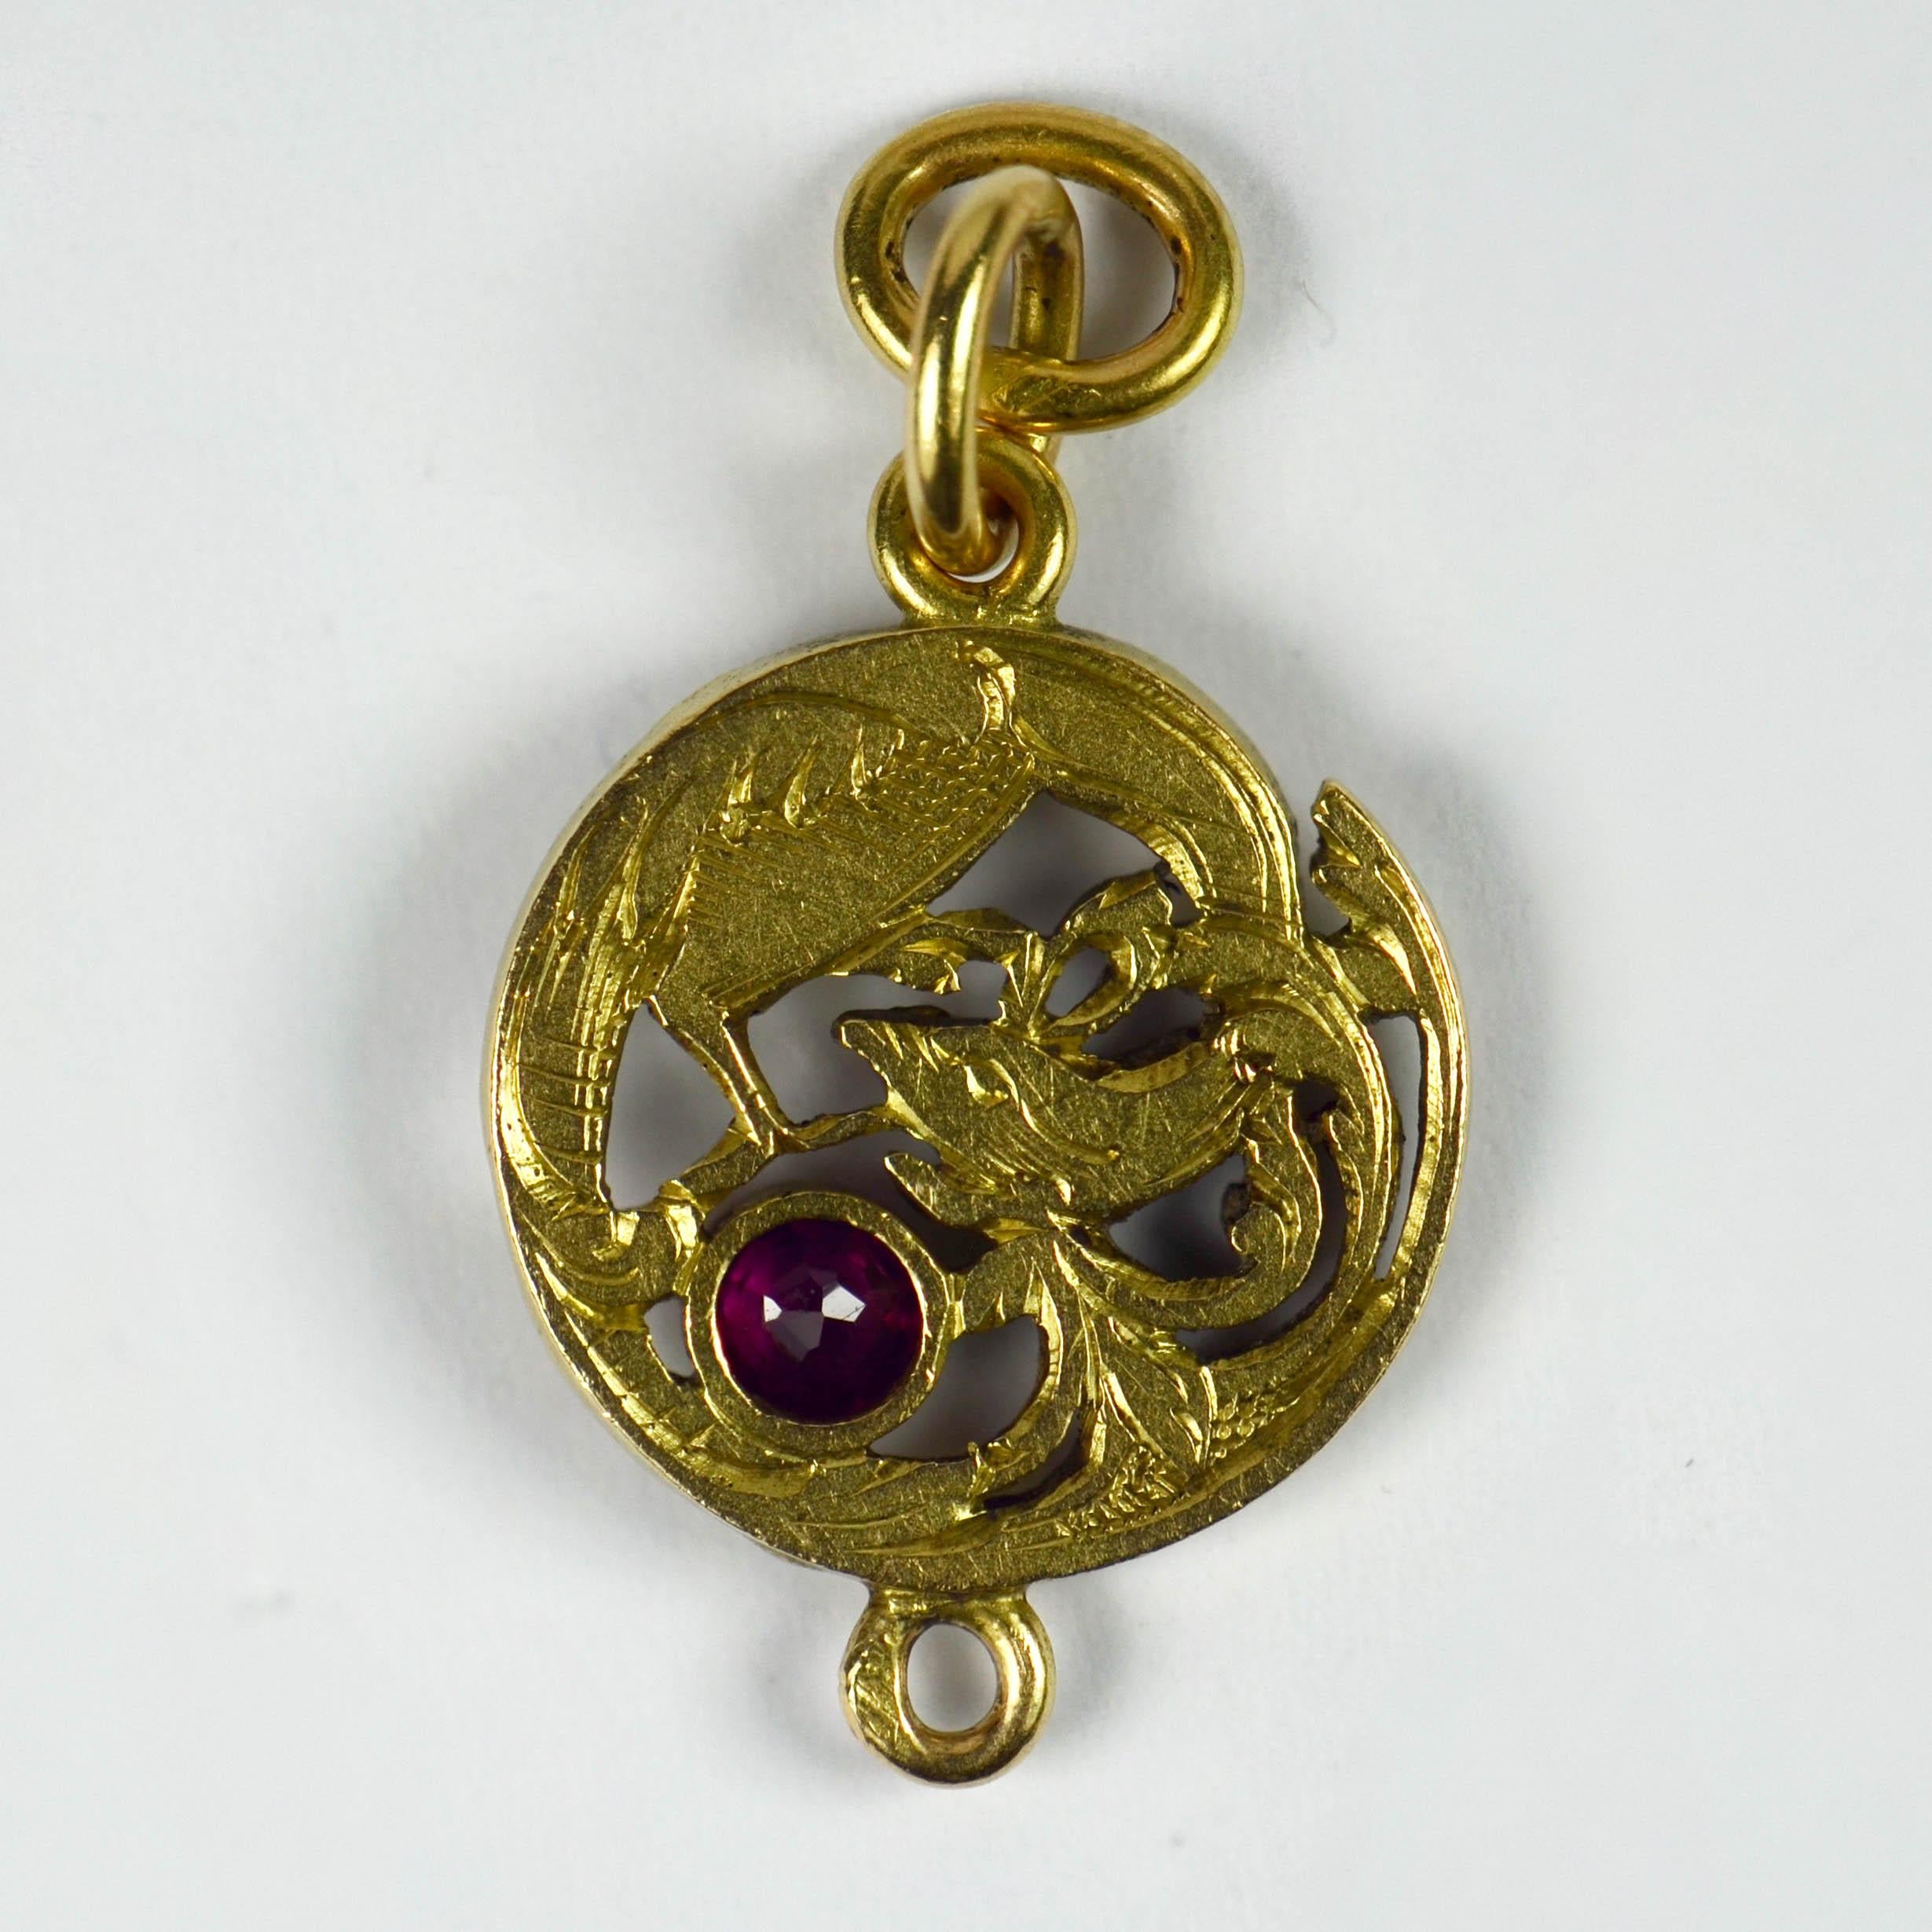 An 18 karat (18K) yellow gold Art Nouveau charm pendant designed as a curled up griffon with a round cut red ruby. The reverse engraved with feathers and lines to further depict this fantastic beast. Stamped with the eagle’s head for 18 karat gold